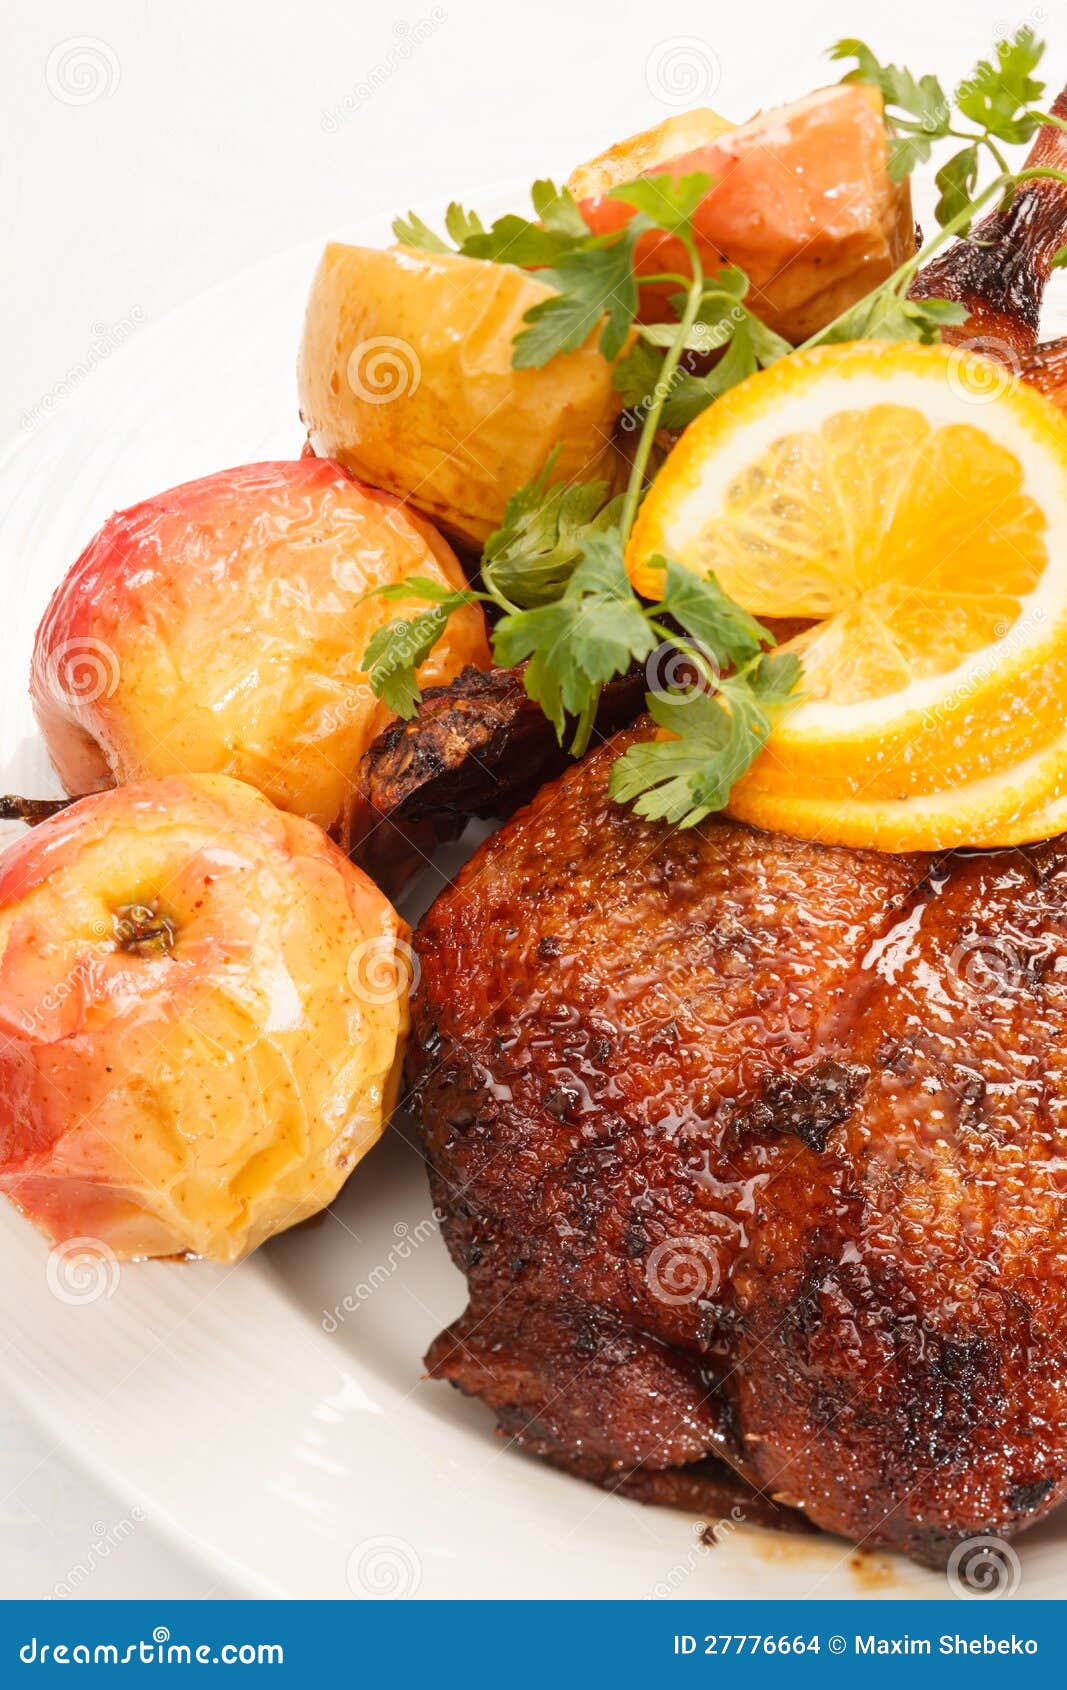 Christmas roast goose stock photo. Image of poultry, tasty - 27776664